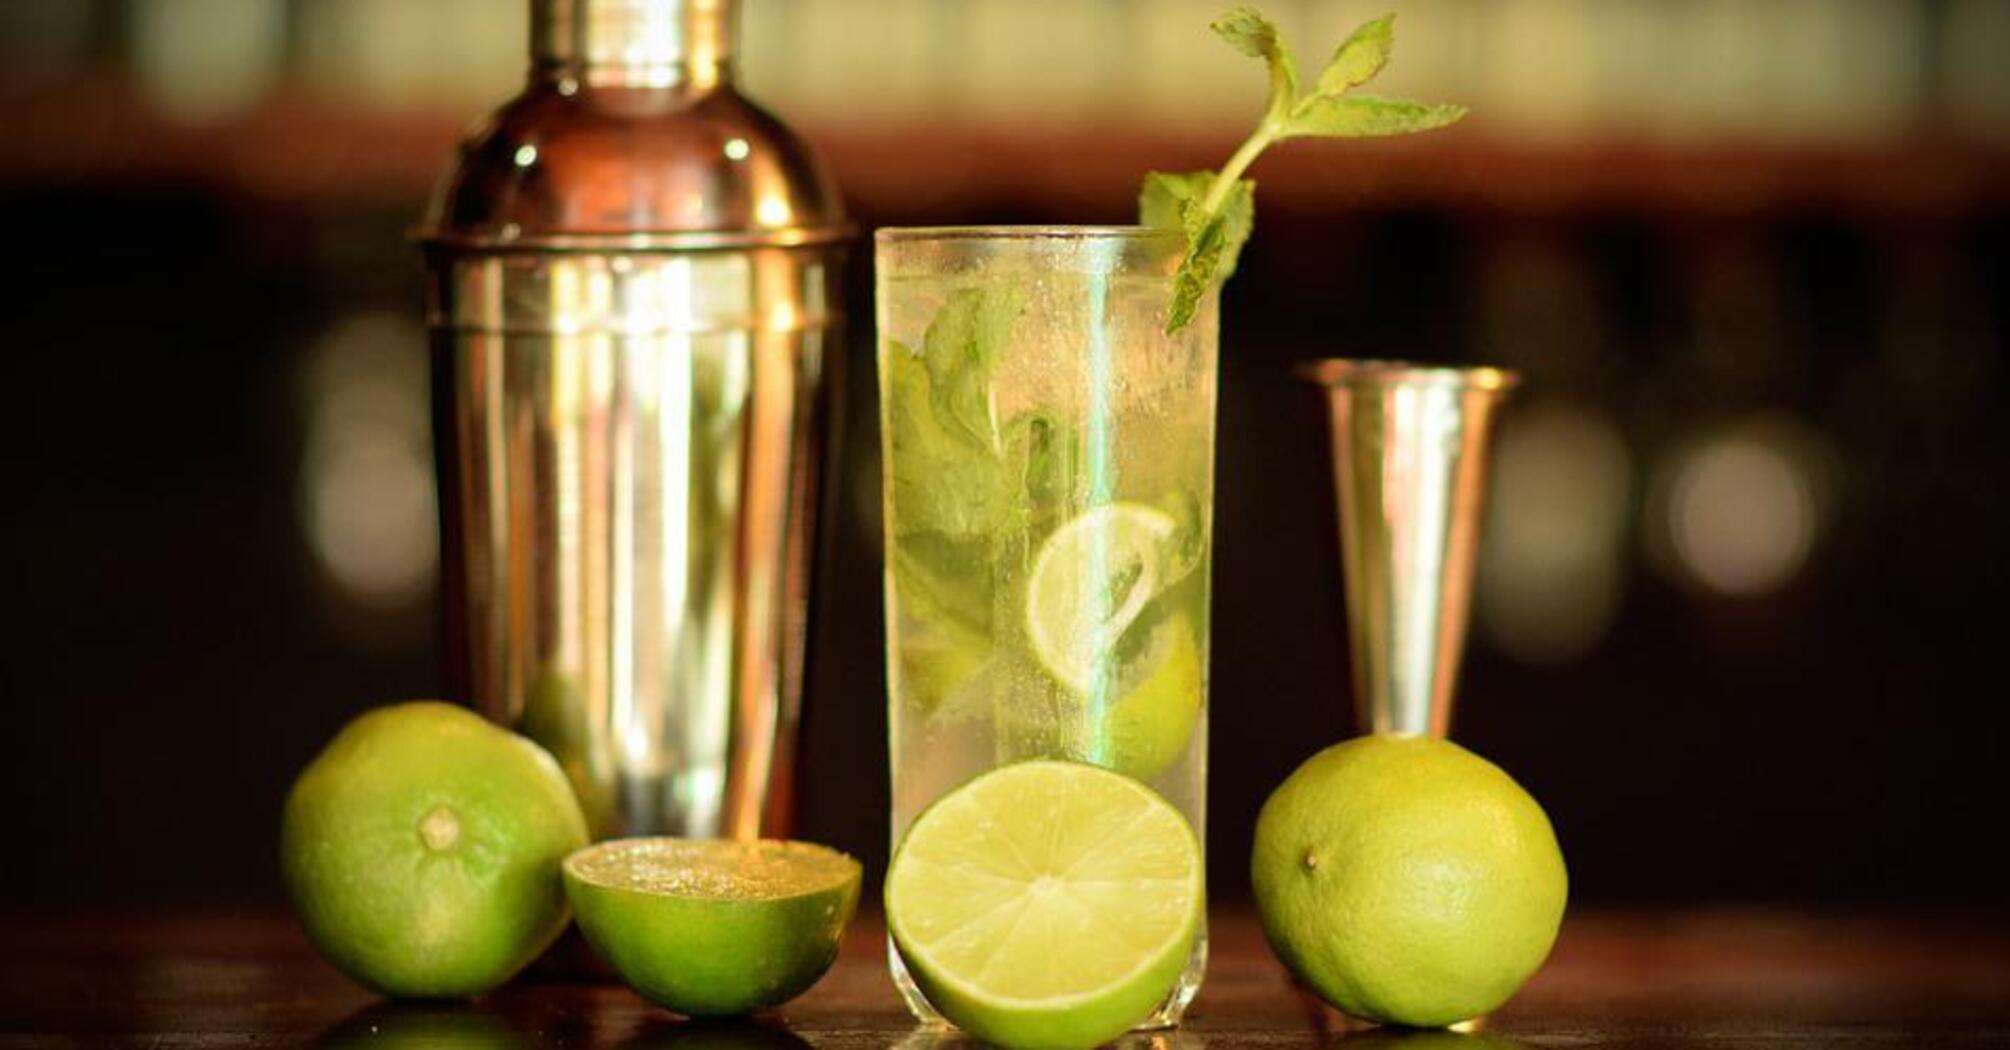 Non-alcoholic mojito at home: how to make a popular cocktail